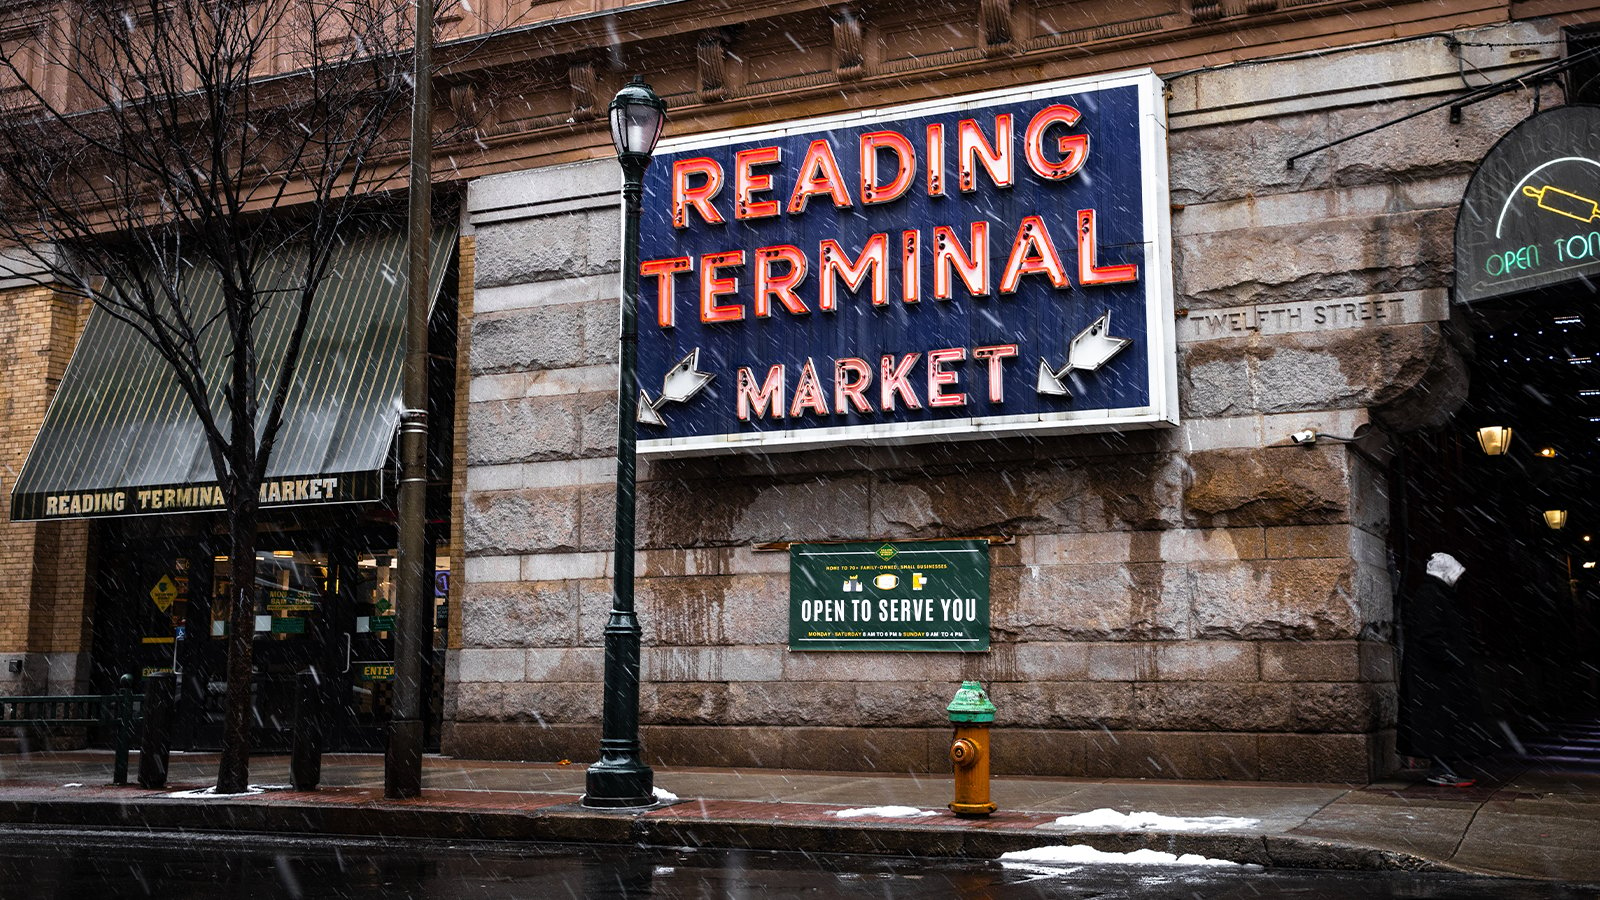 A neon sign for Reading Terminal Market in Philadelphia.